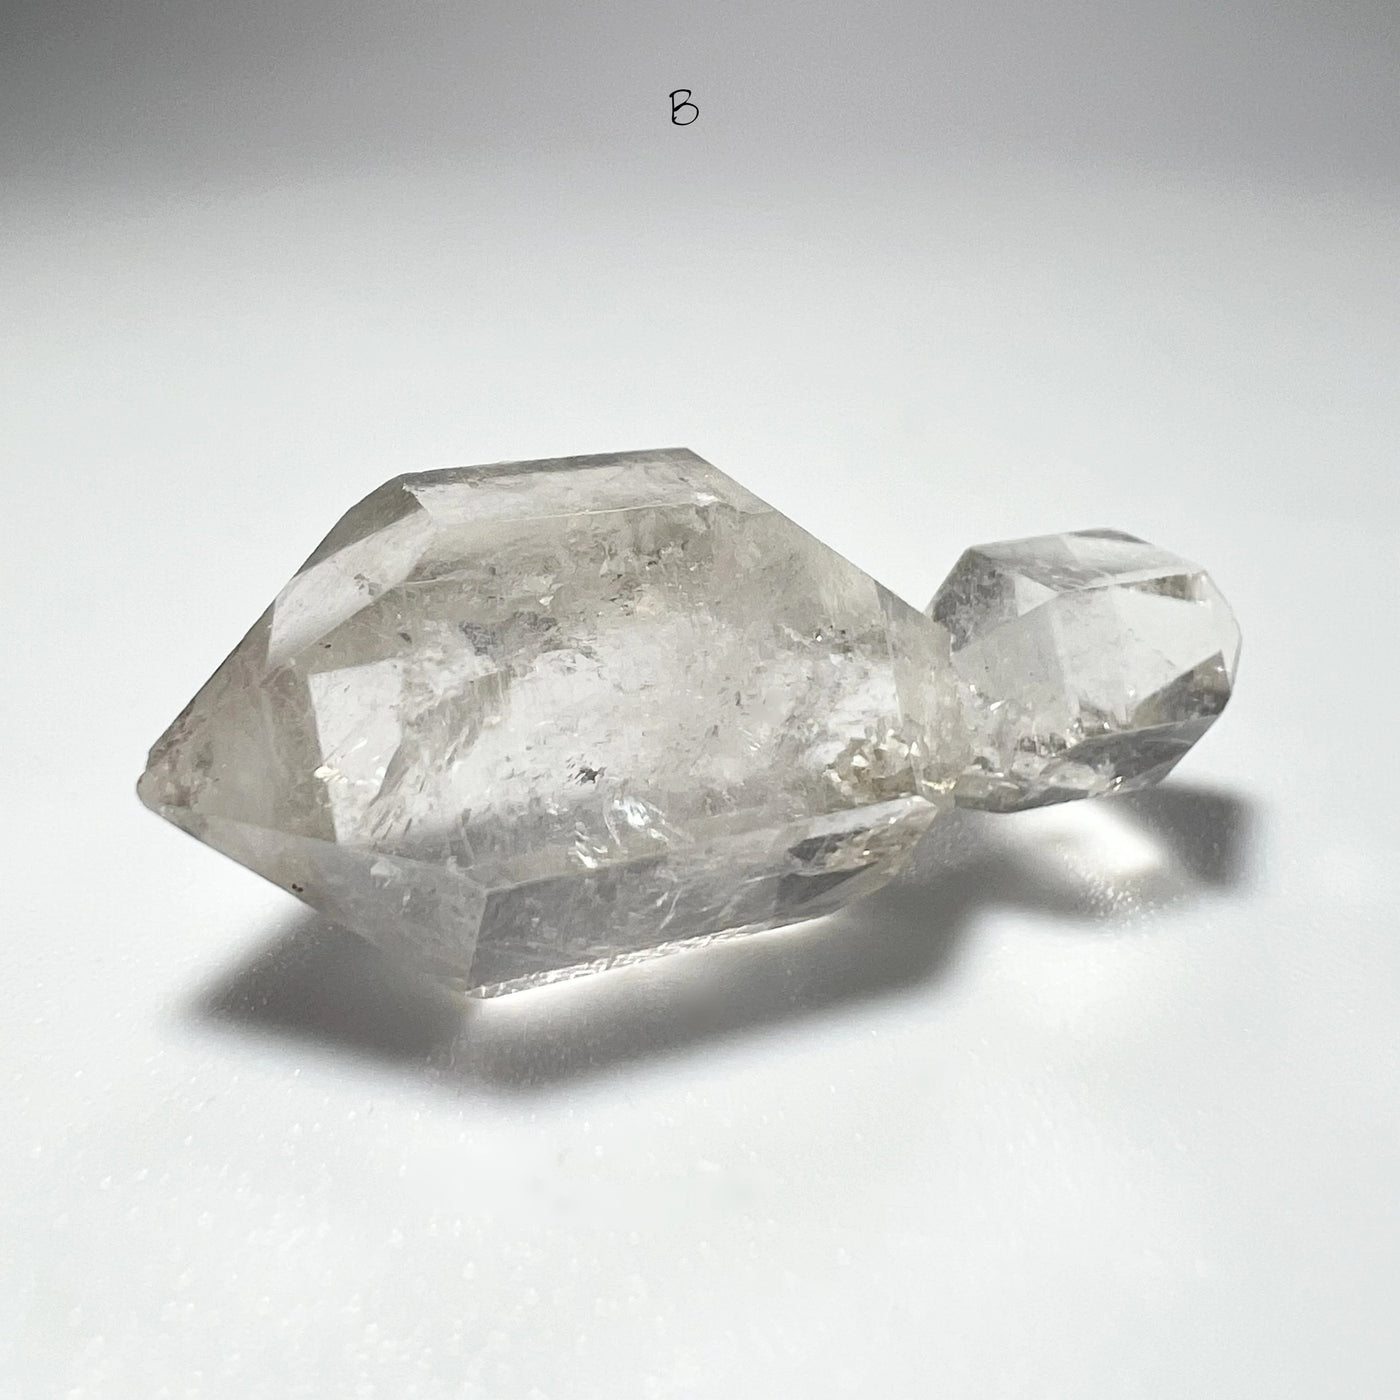 Natural Double Terminated Twin Point Quartz at $35 Each - High Quality